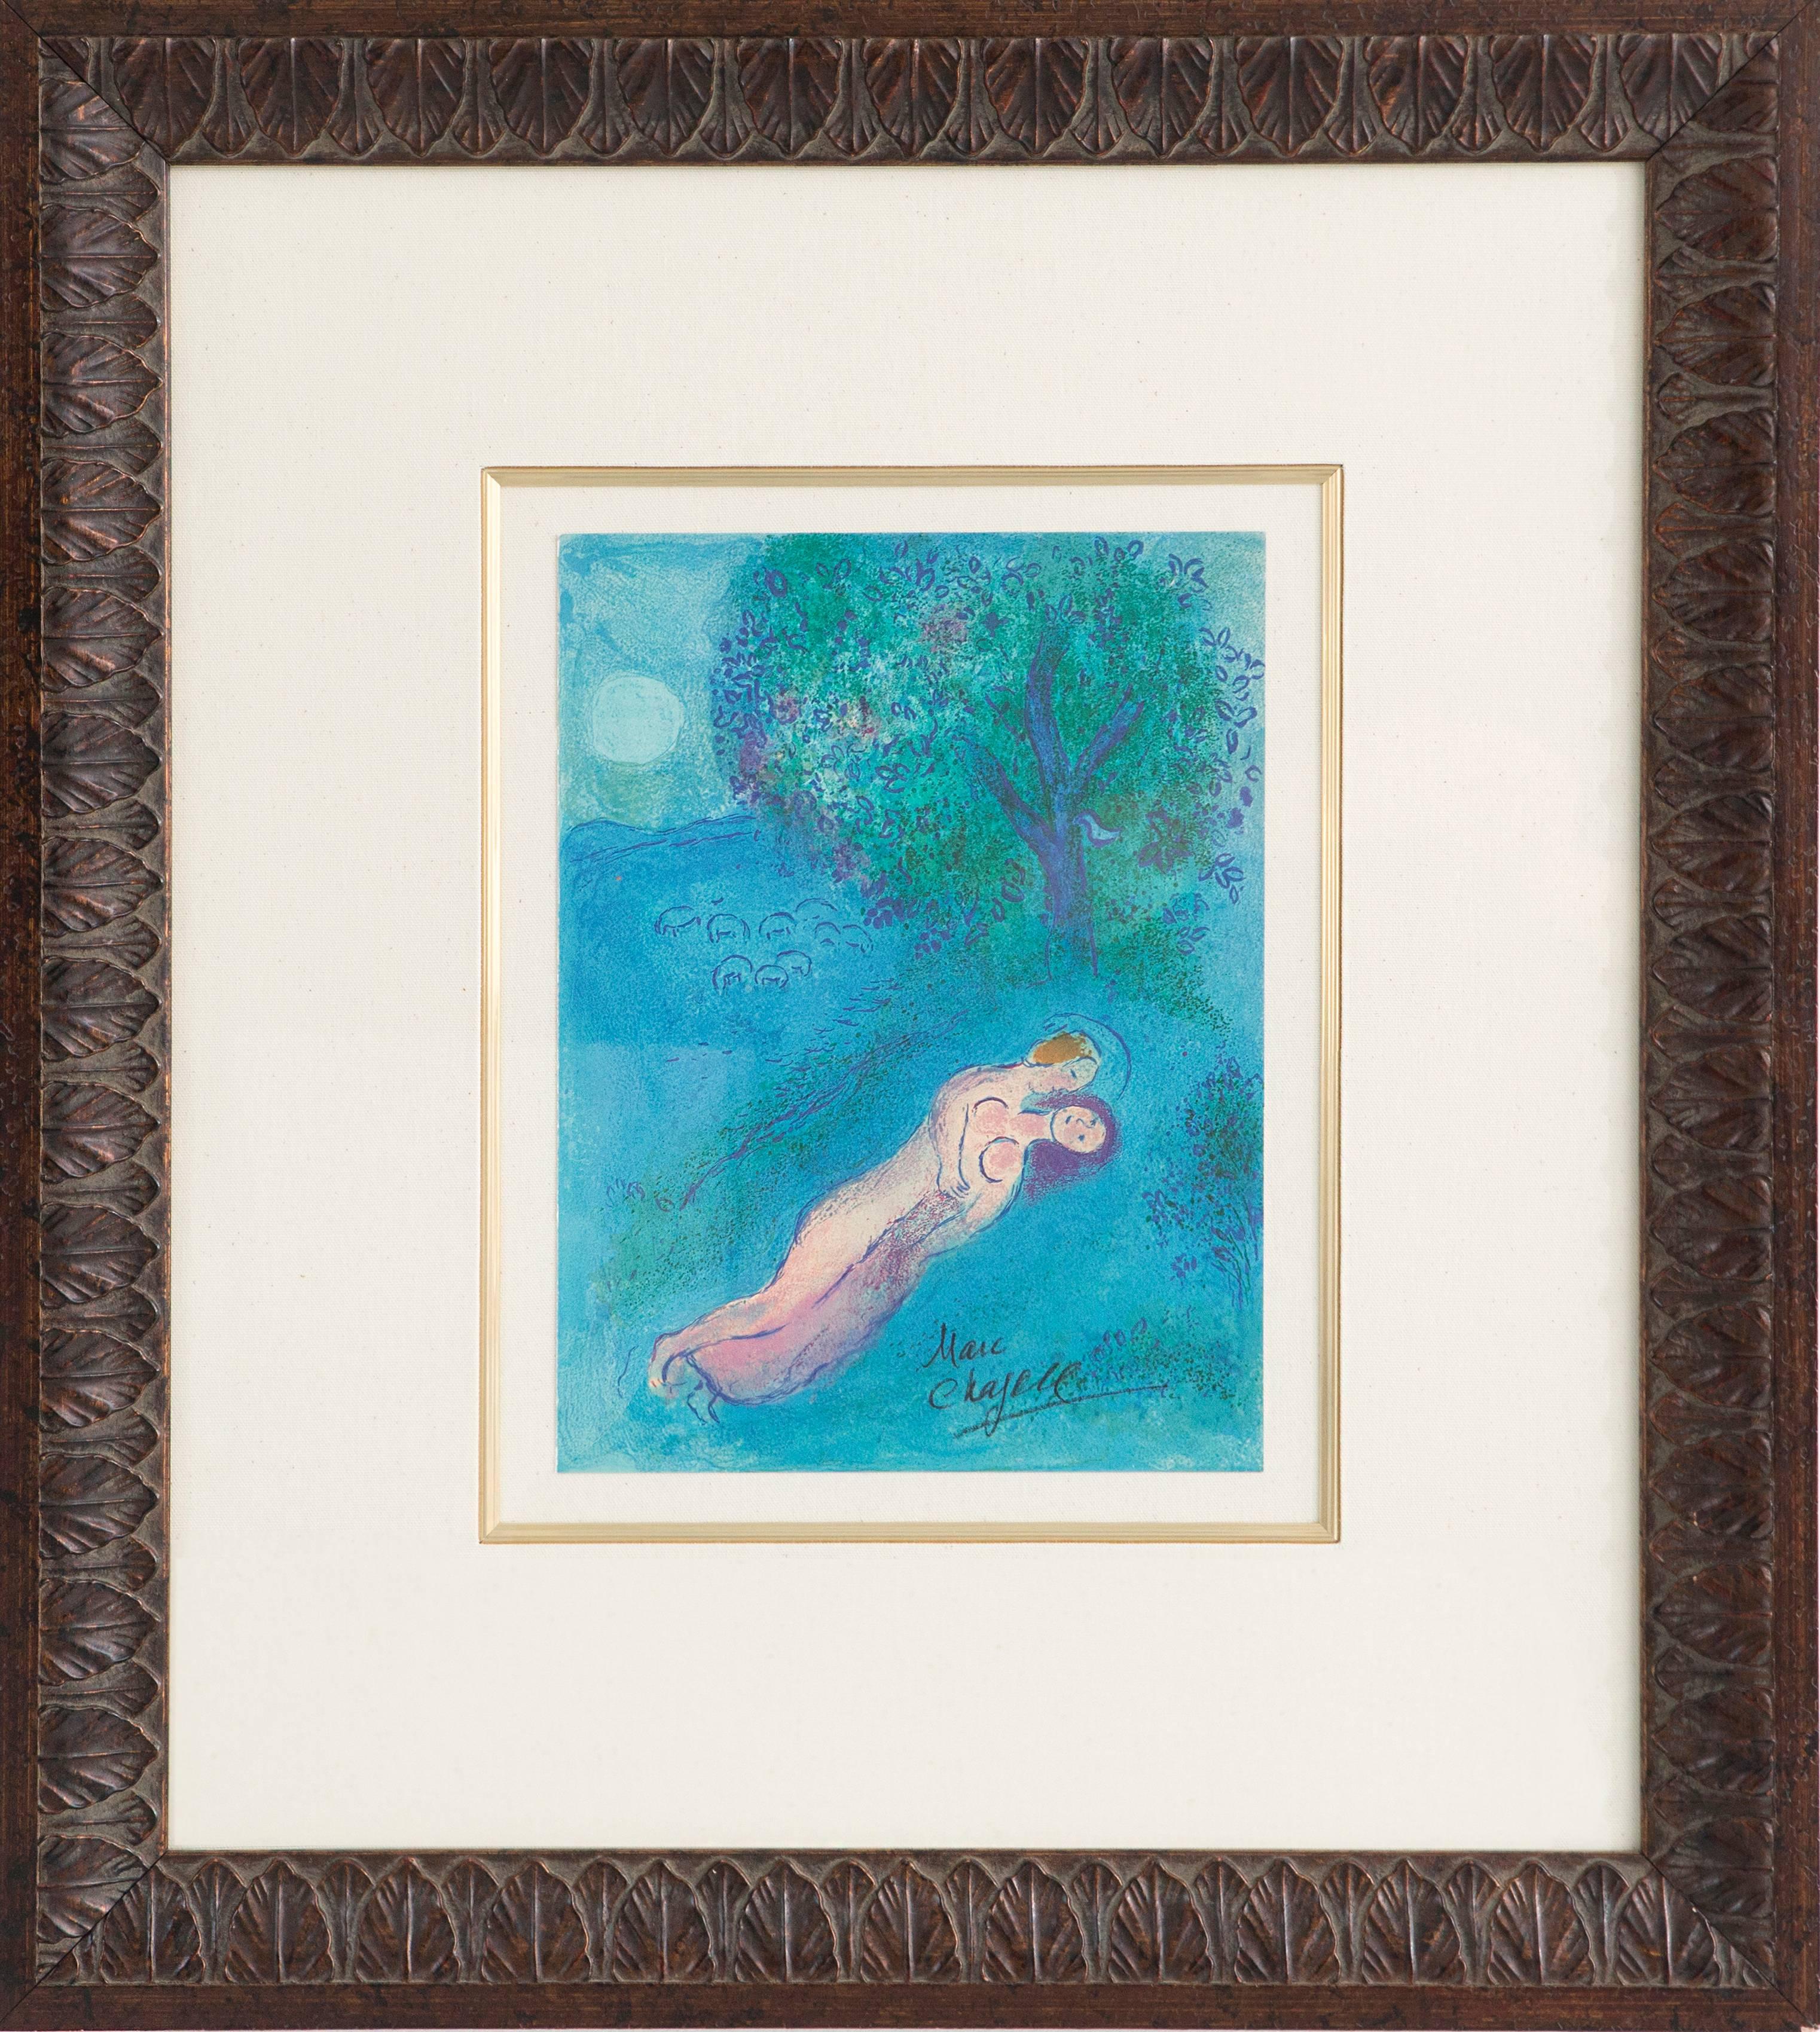 Original lithographic book illustration by Marc Chagall for the Greek fable "Daphnis and Chloé".

Marked by a vivid Mediterranean blue, this illustration is a poignant, soulful scene conveying the innocence and ardor of first love. Chagall's